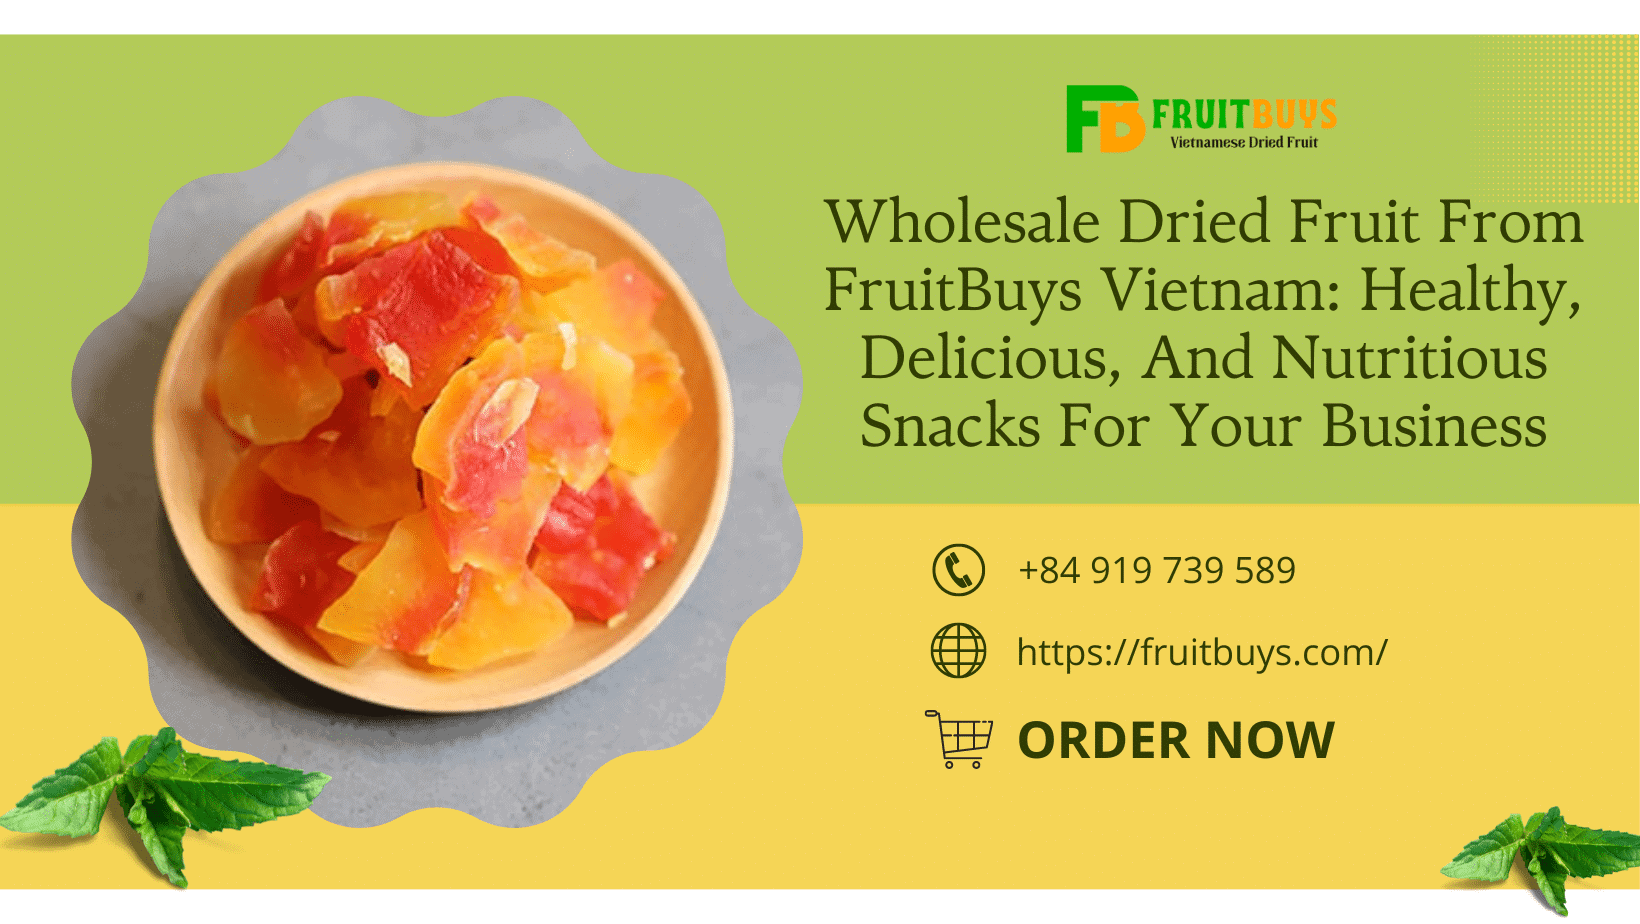 Fruitbuys Vietnam Wholesale Dried Fruit From Fruitbuys Vietnam Healthy Delicious And Nutritious Snacks For Your Business